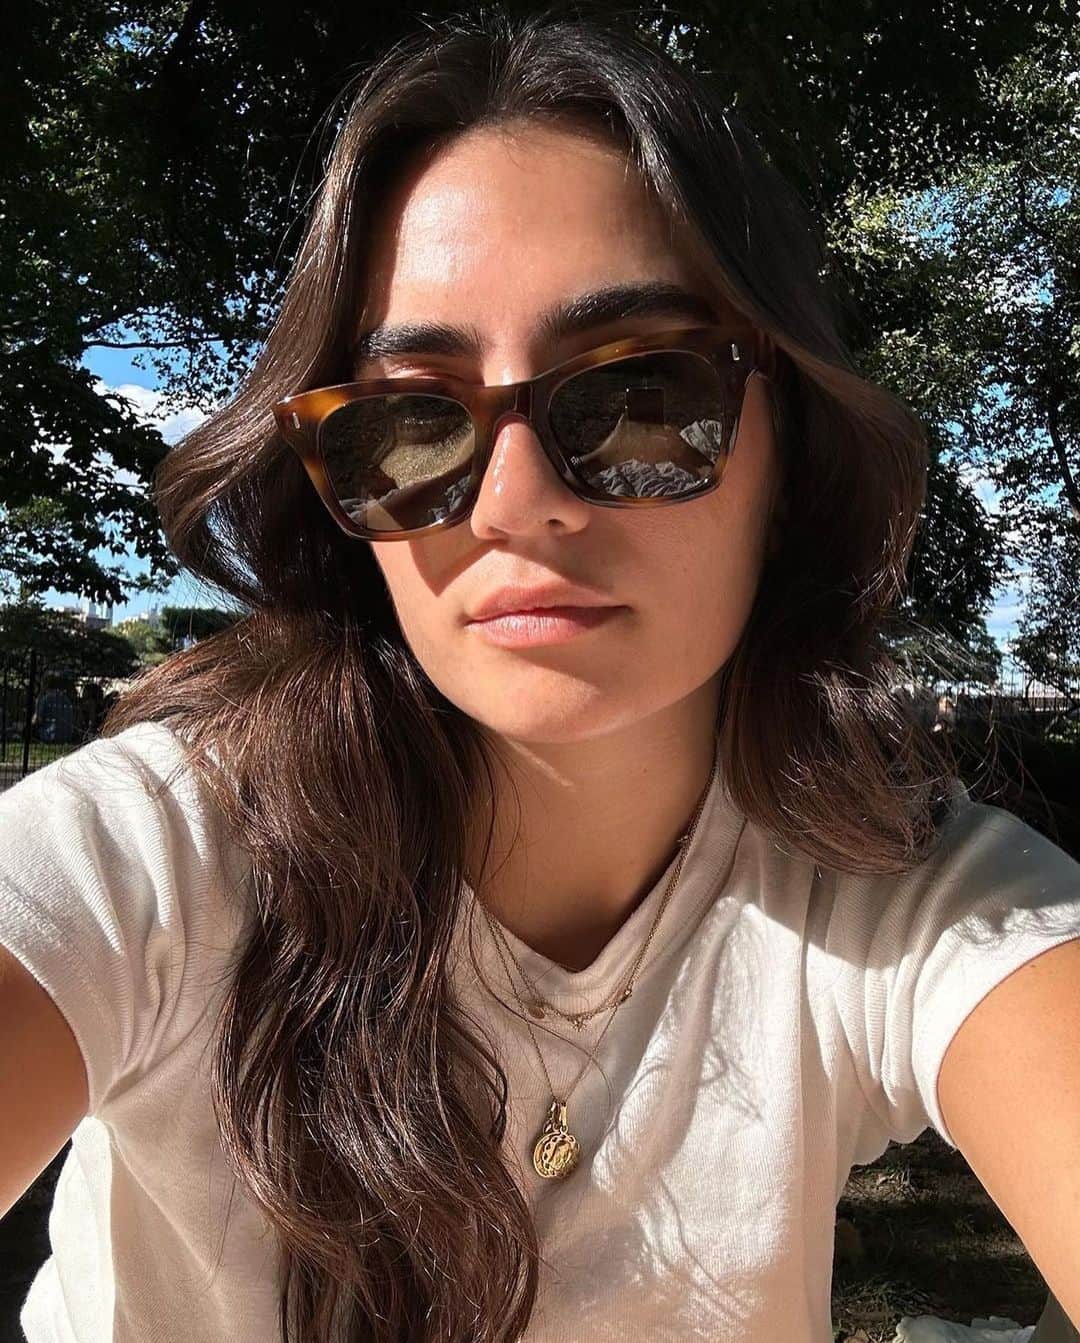 Warby Parkerのインスタグラム：「Sunglasses season is 365 days a year. Don’t let anyone tell you differently 😎 @stefanie.taylor」